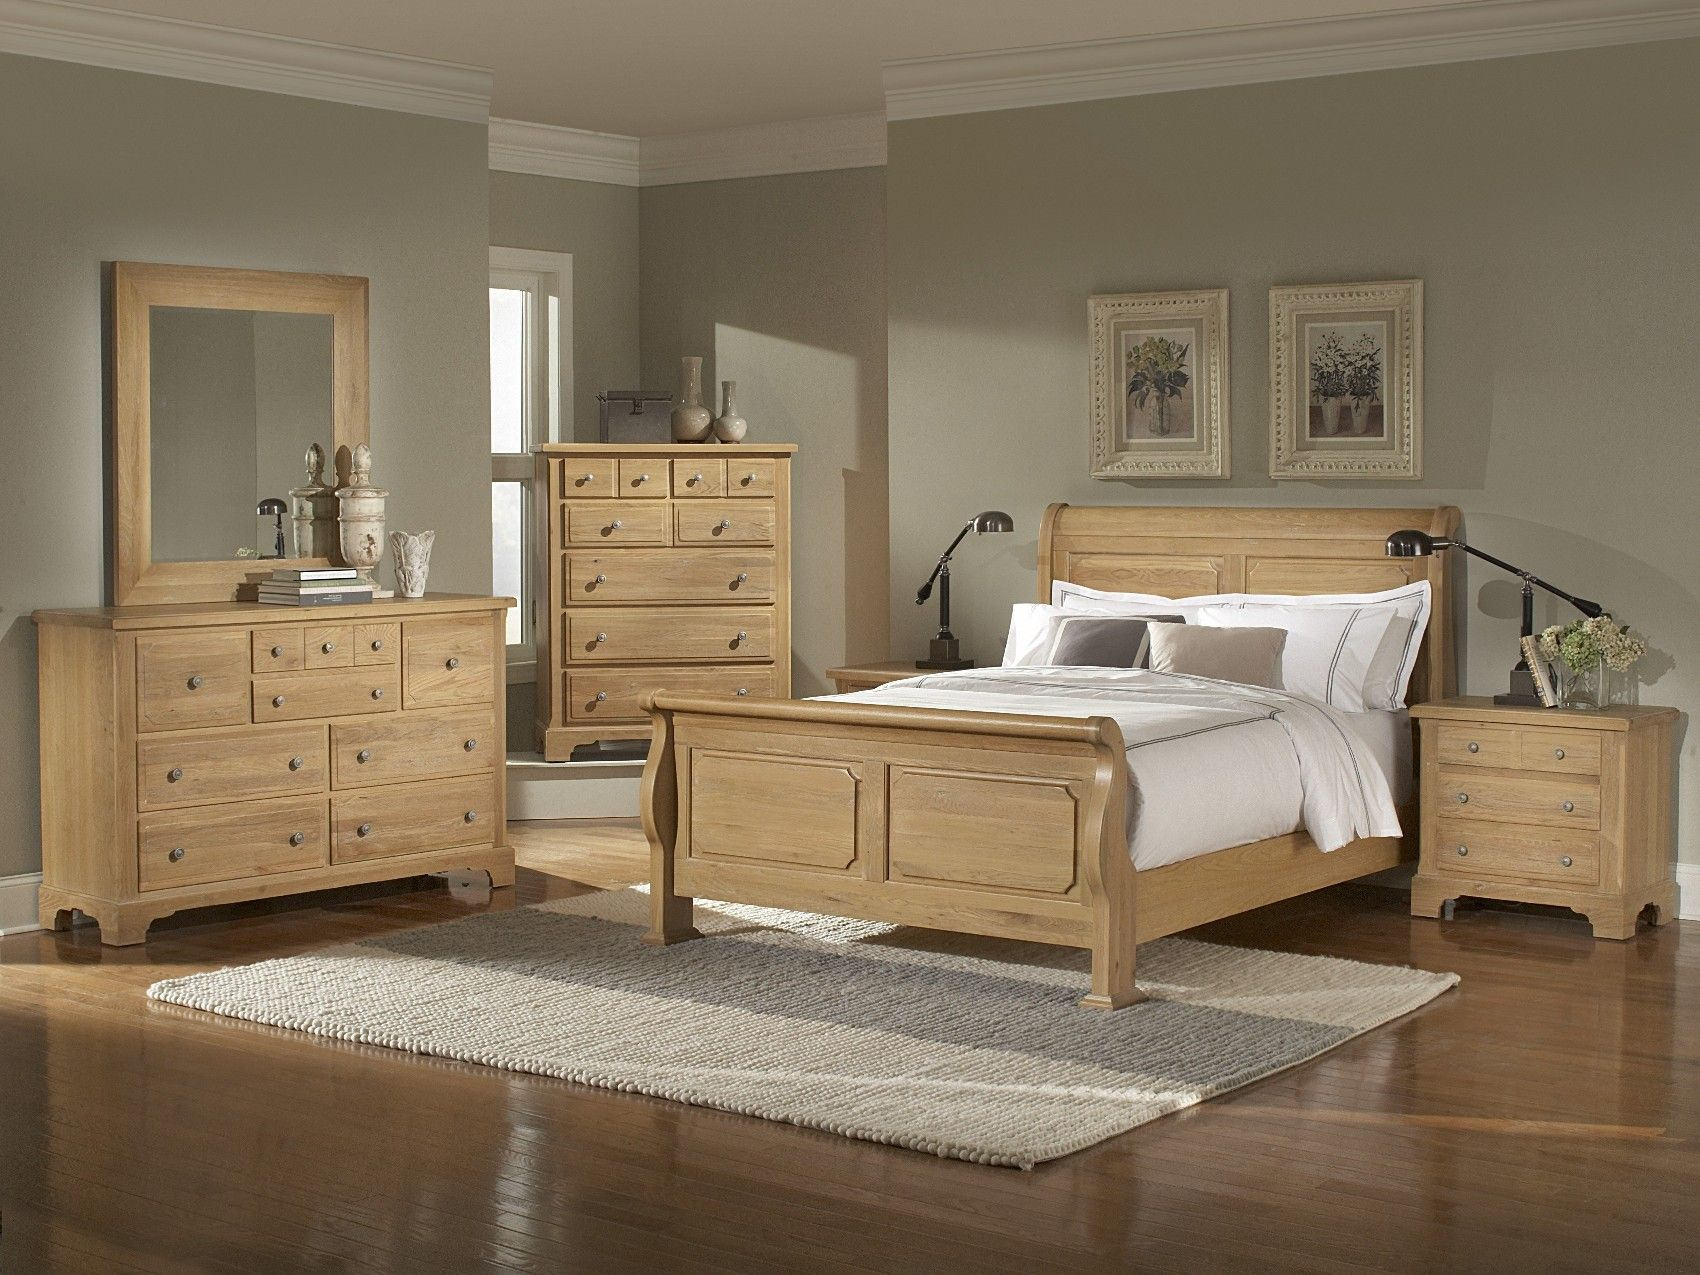 Oak Bedroom Furniture Sets Washed Oak Queen Sleigh Bedroom pertaining to sizing 1700 X 1275